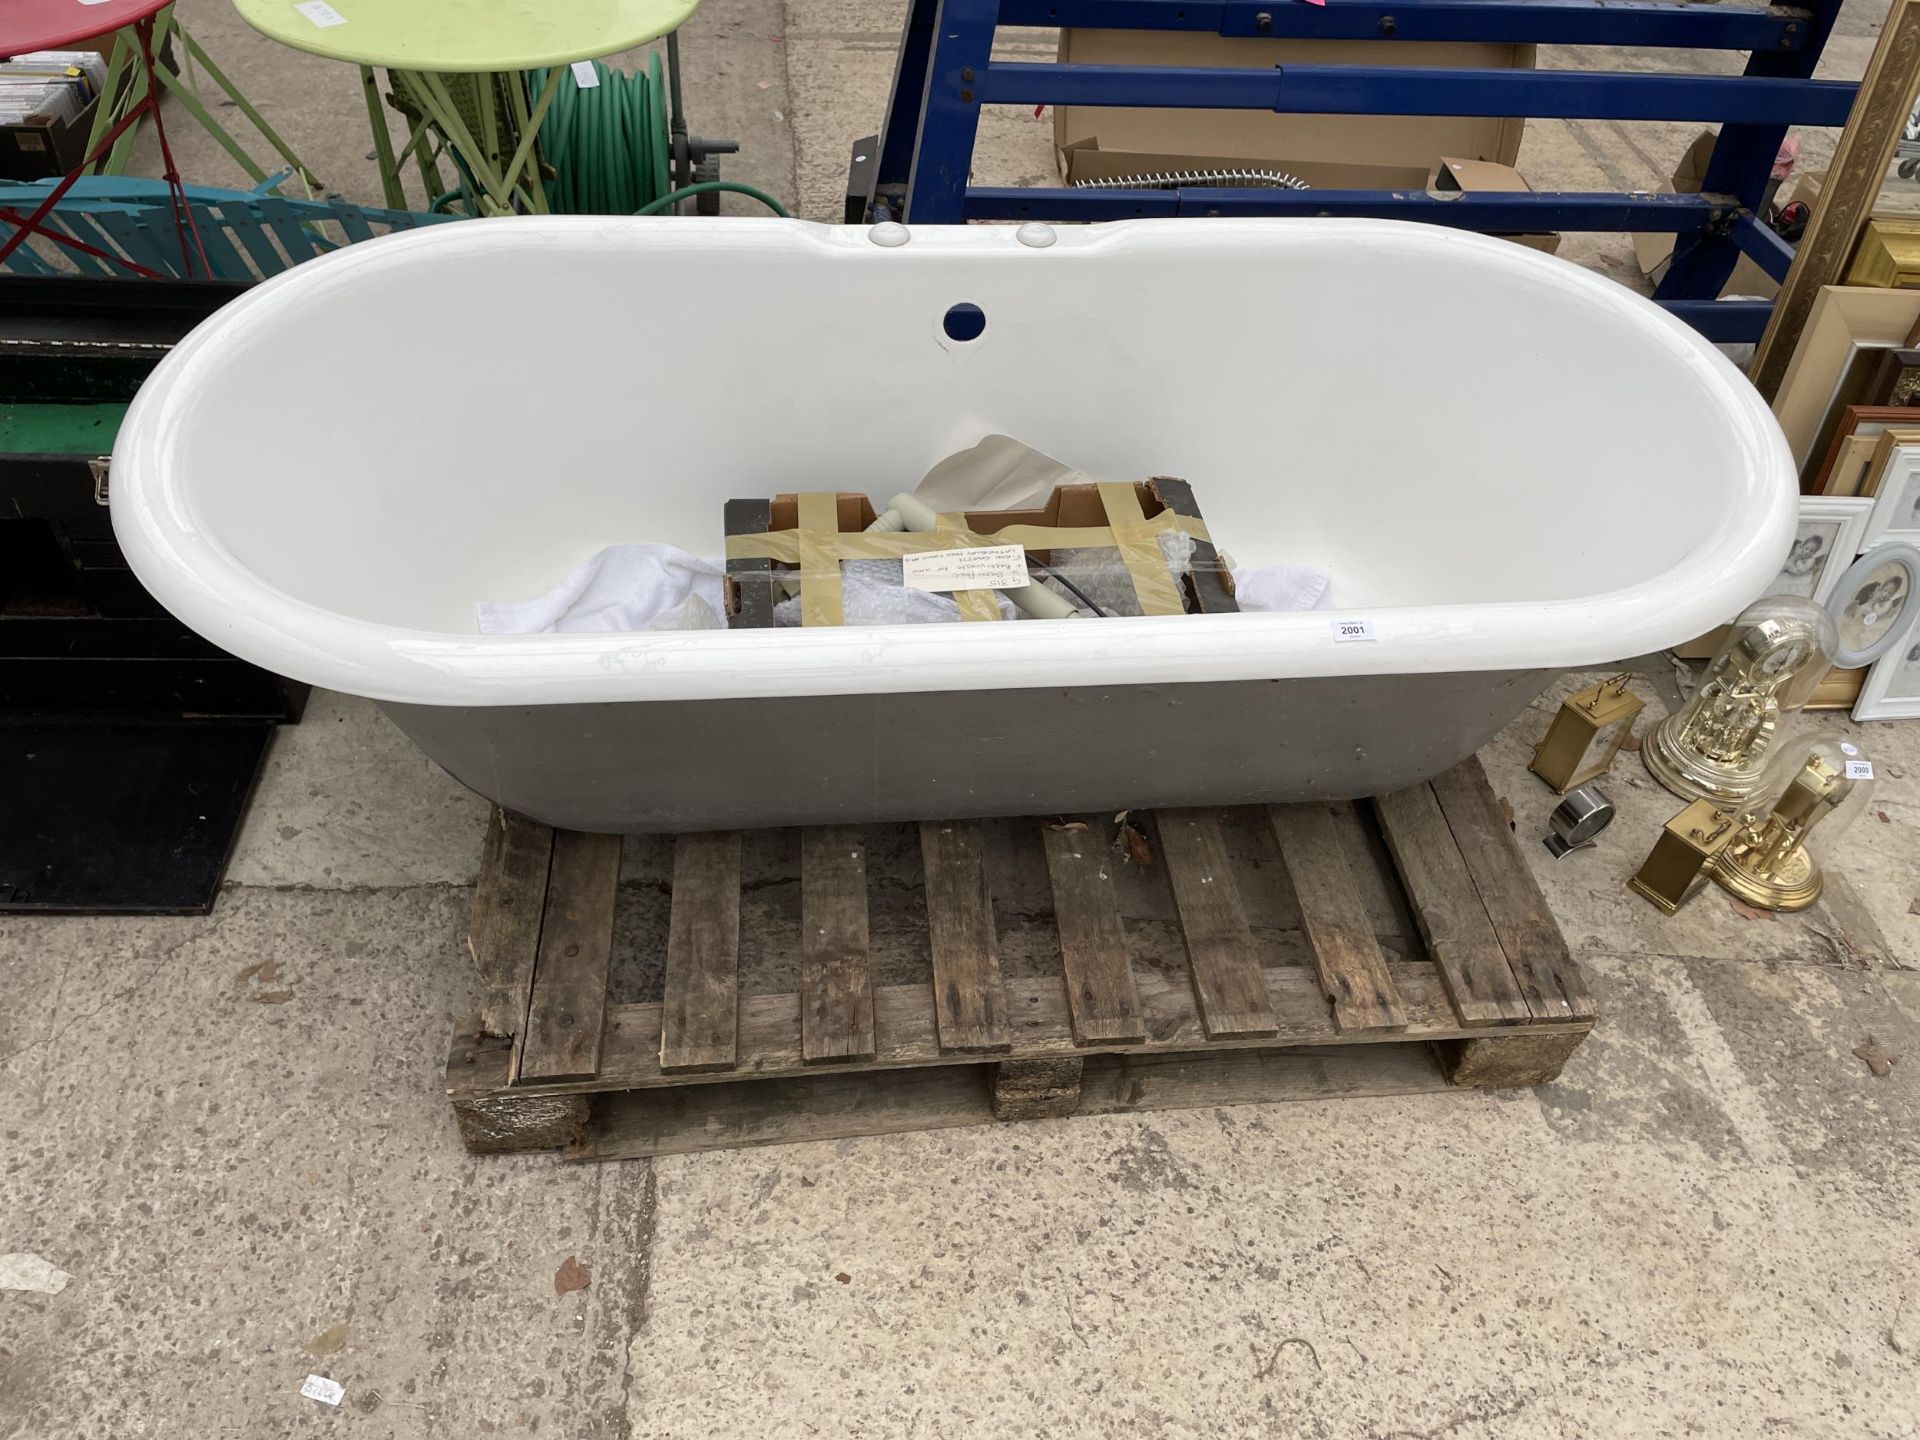 A FIRED EARTH "CANTERBURY" METAL FREESTANDING BATH WITH FOUR FEET AND WASTE FITTINGS (RETAIL £